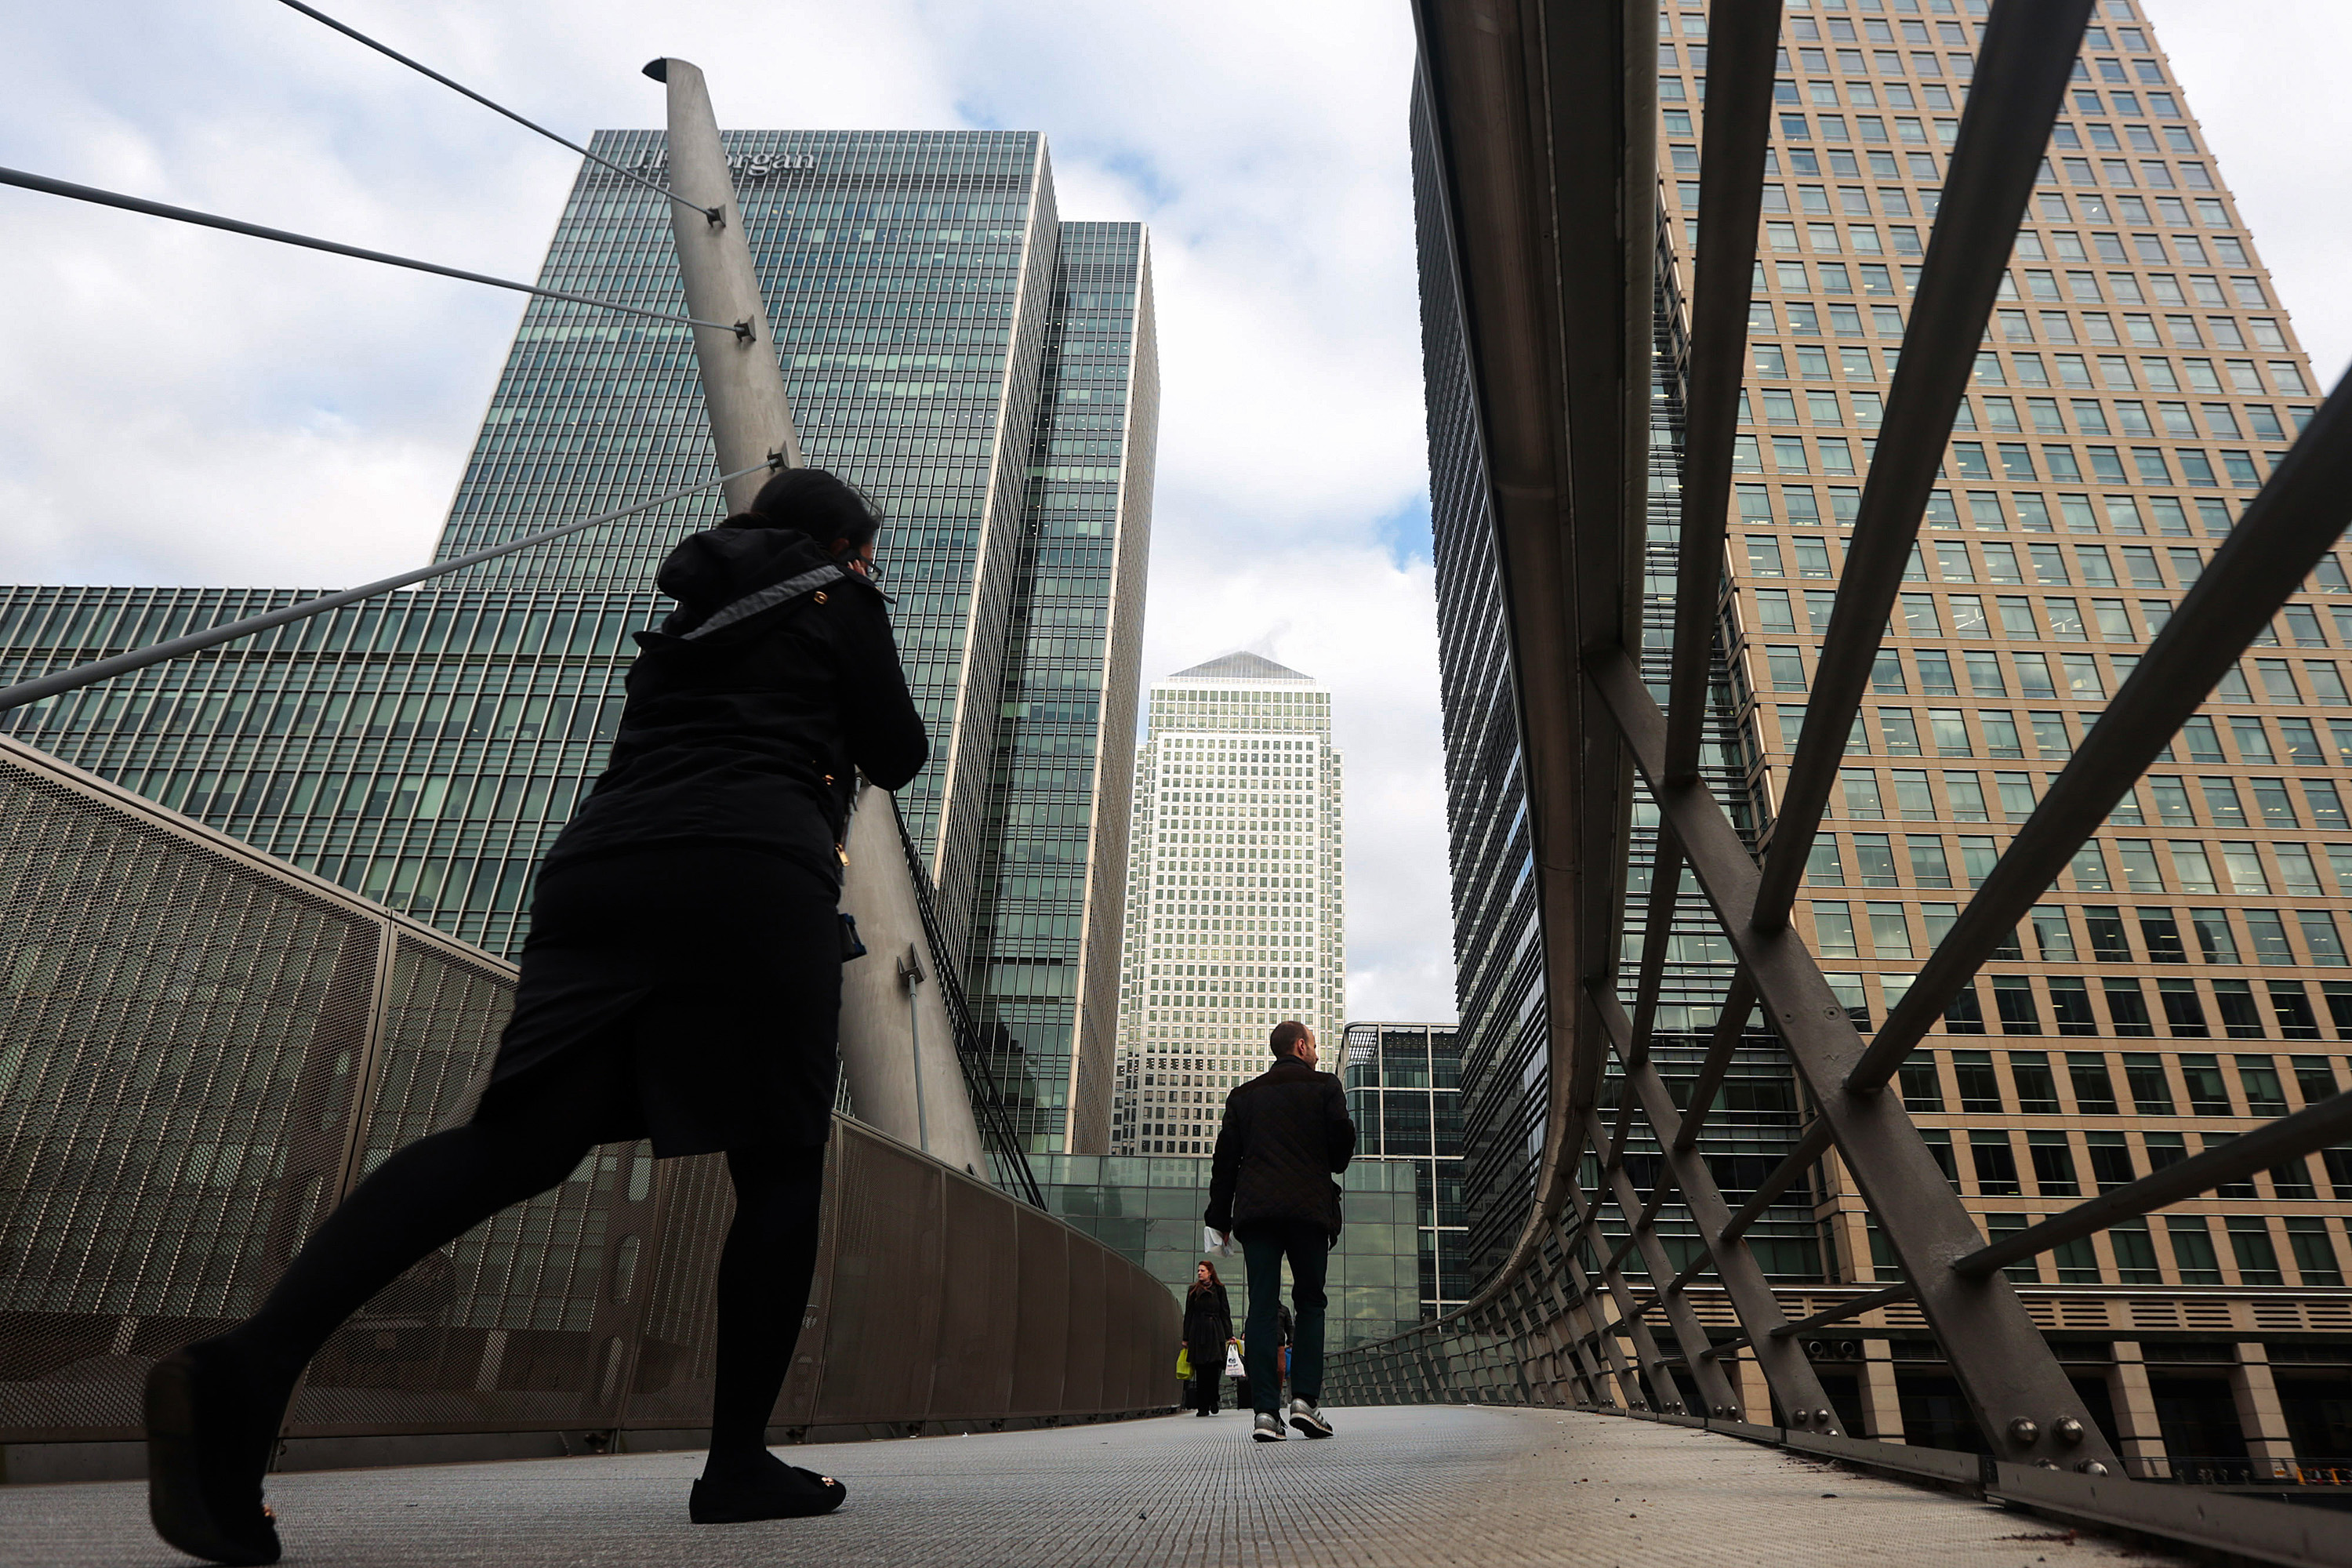 Pedestrians cross a bridge near the offices of JPMorgan Chase &amp; Co., left, and the One Canada Square office building, center, in the Canary Wharf business, financial and shopping district of London. Photographer: Jason Alden/Bloomberg
